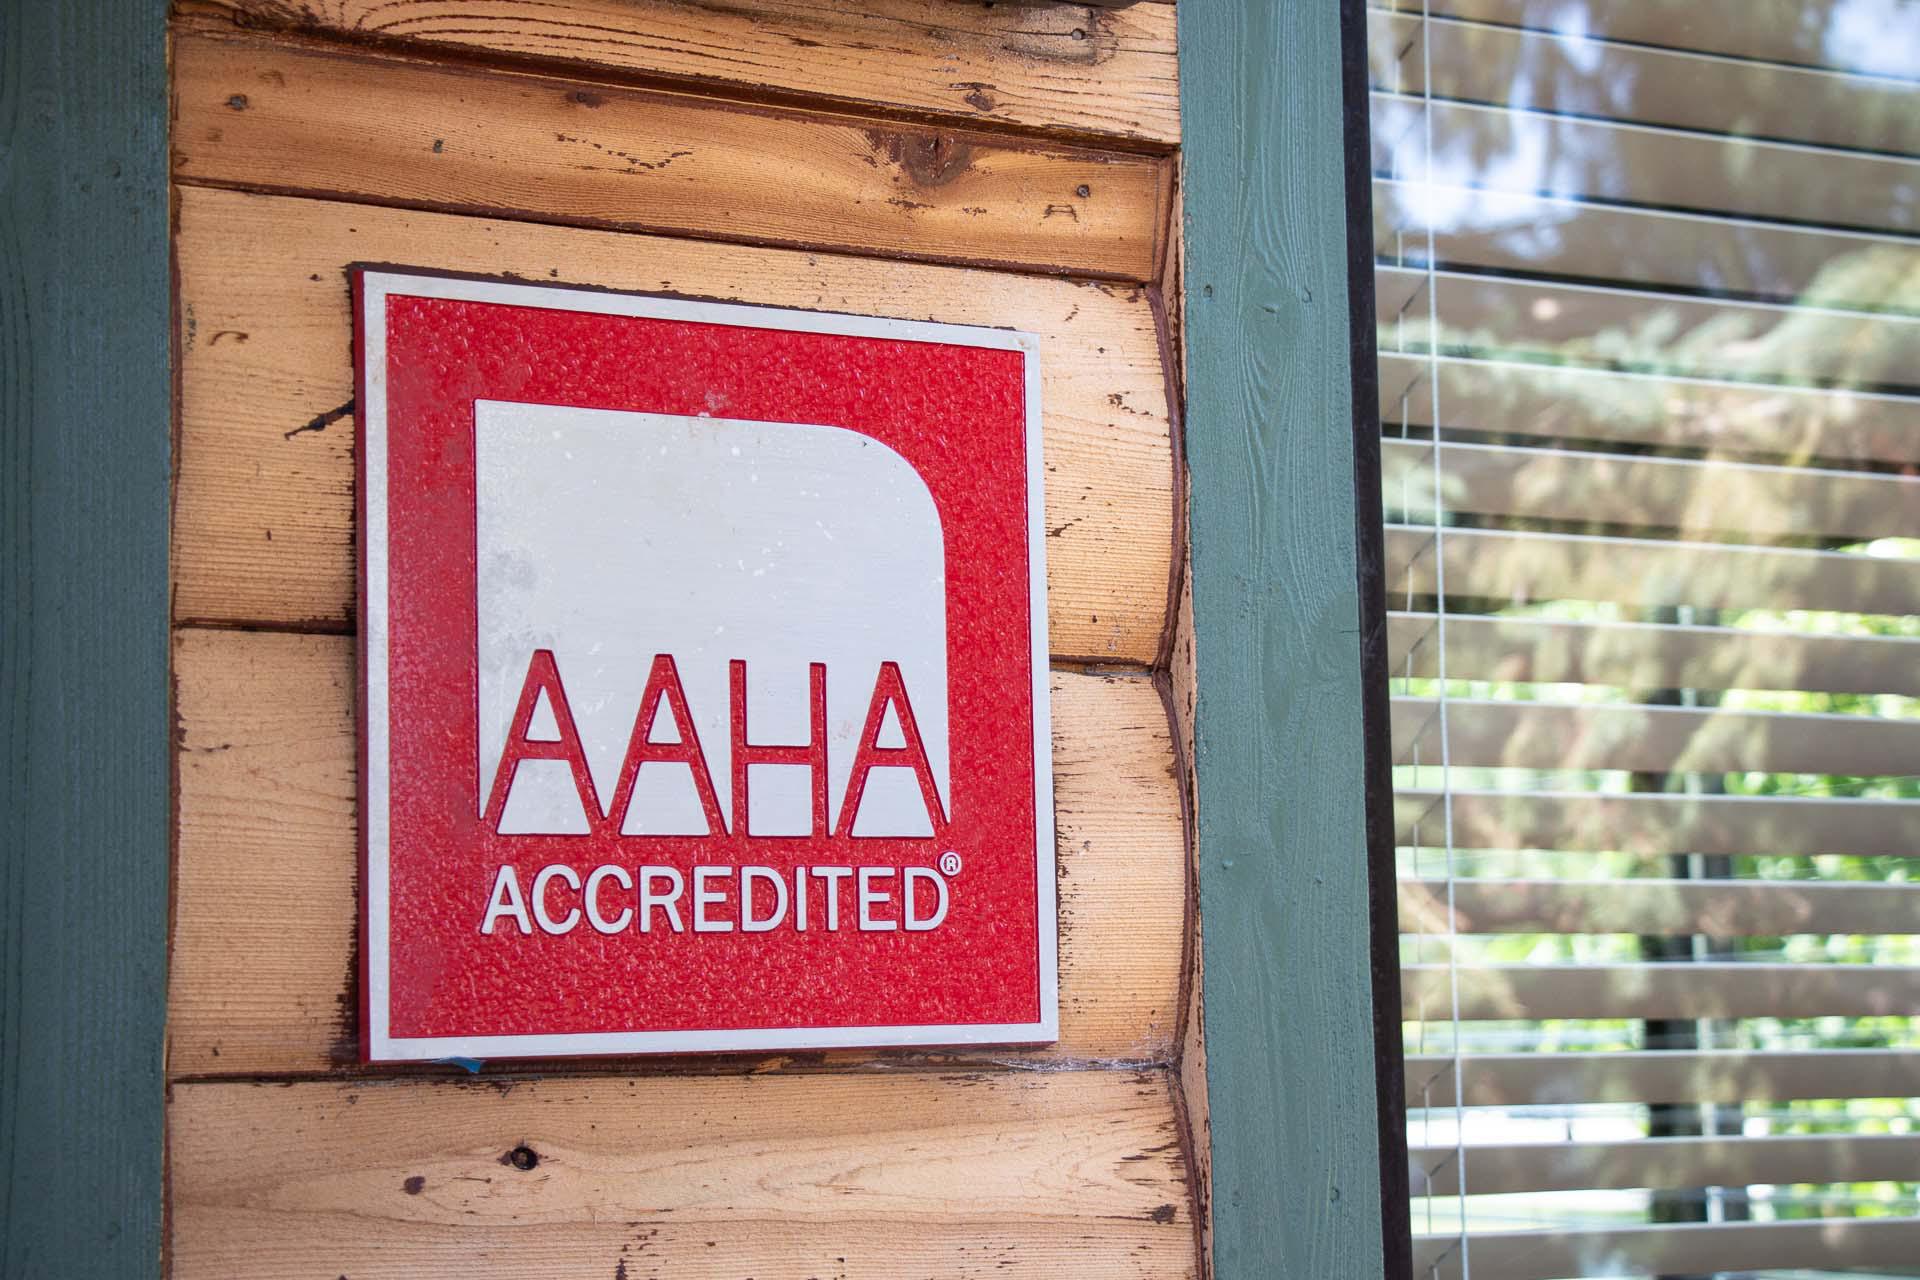 Our practice has proudly been AAHA-accredited since 1999.